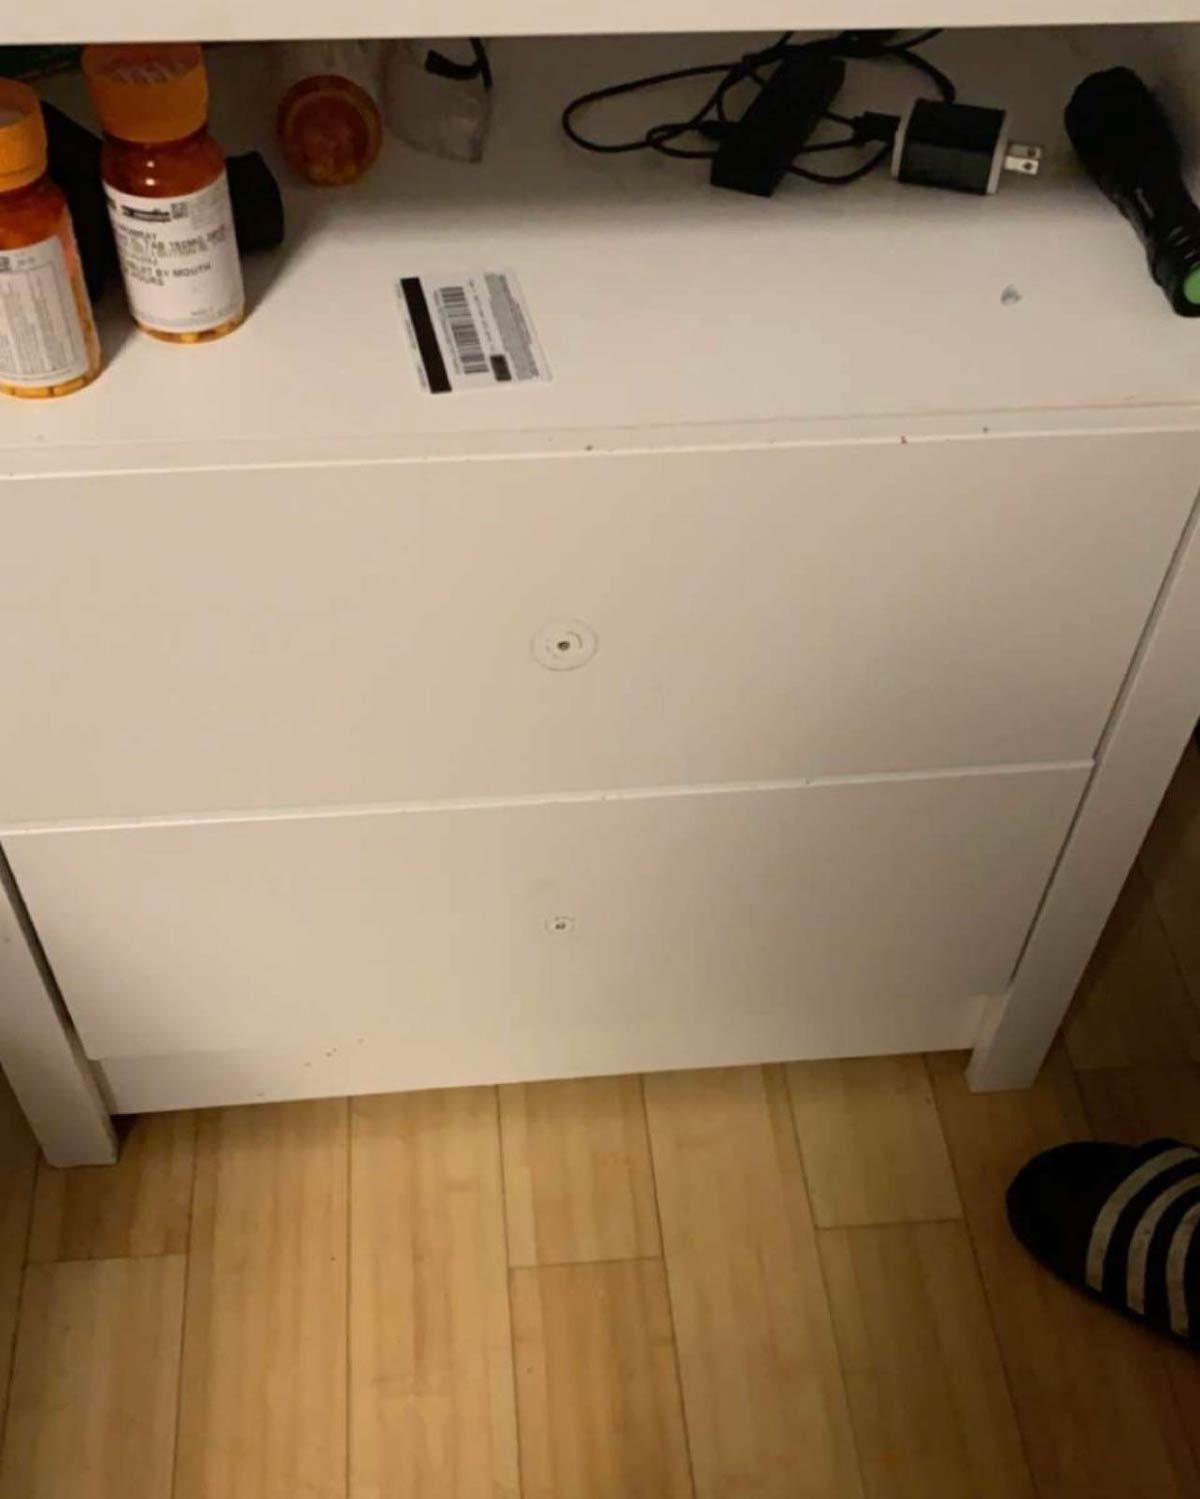 My friend's girlfriend moved out and took everything, including the drawer handles